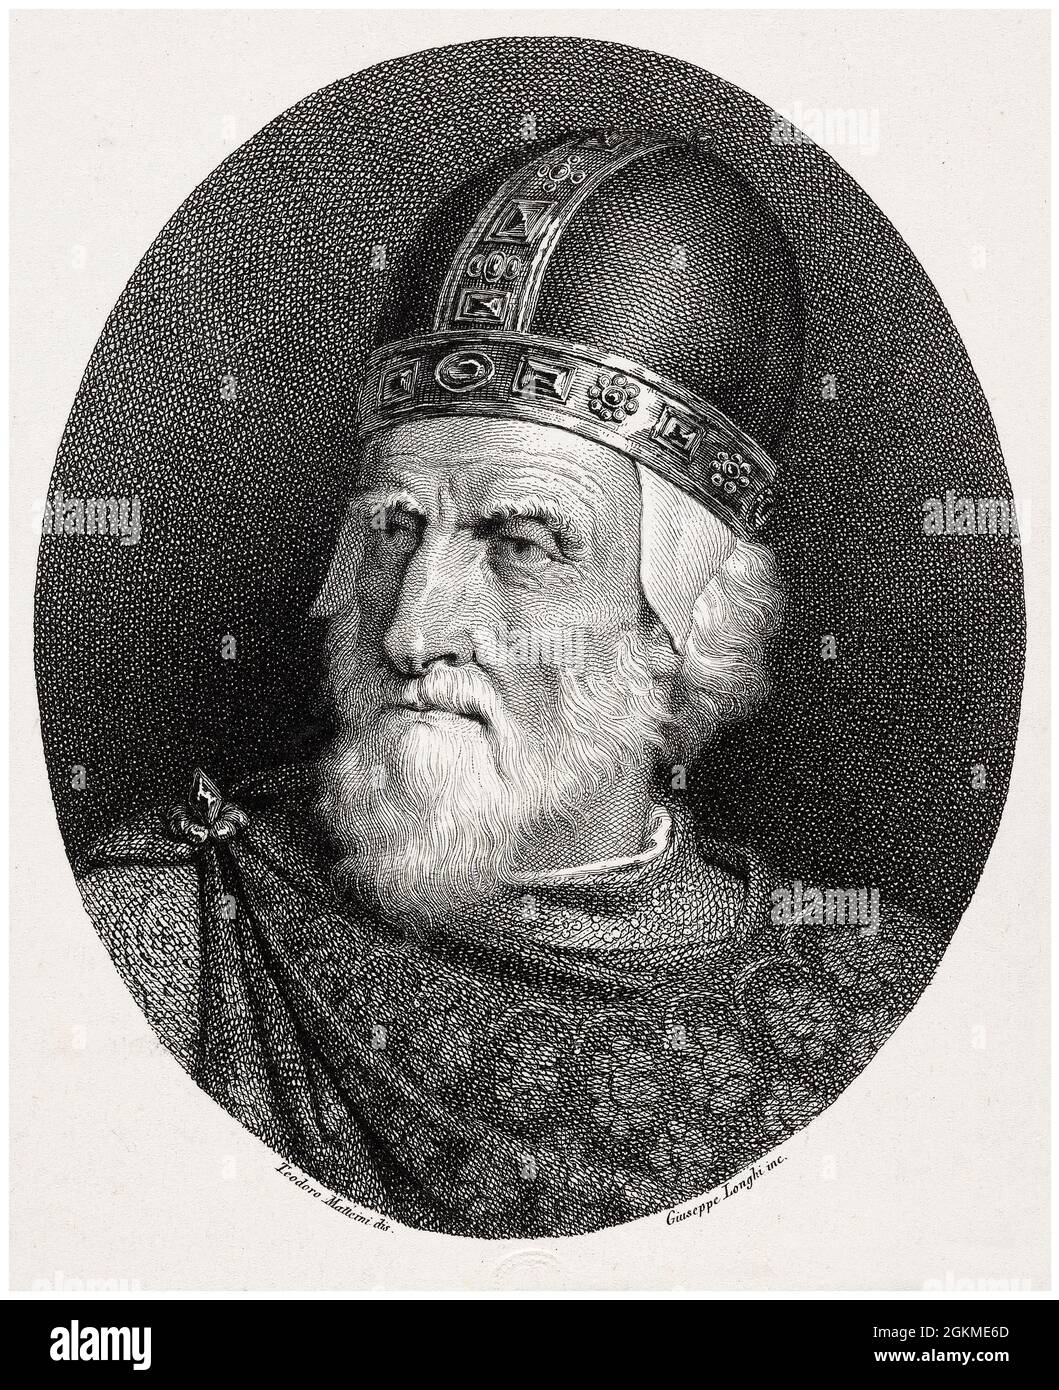 Charlemagne (748-814), King of the Franks and the Lombards, Emperor of Rome, wearing a crown - portrait engraving by Giuseppe Longhi & Theodoro Matteini, 1780-1831 Stock Photo